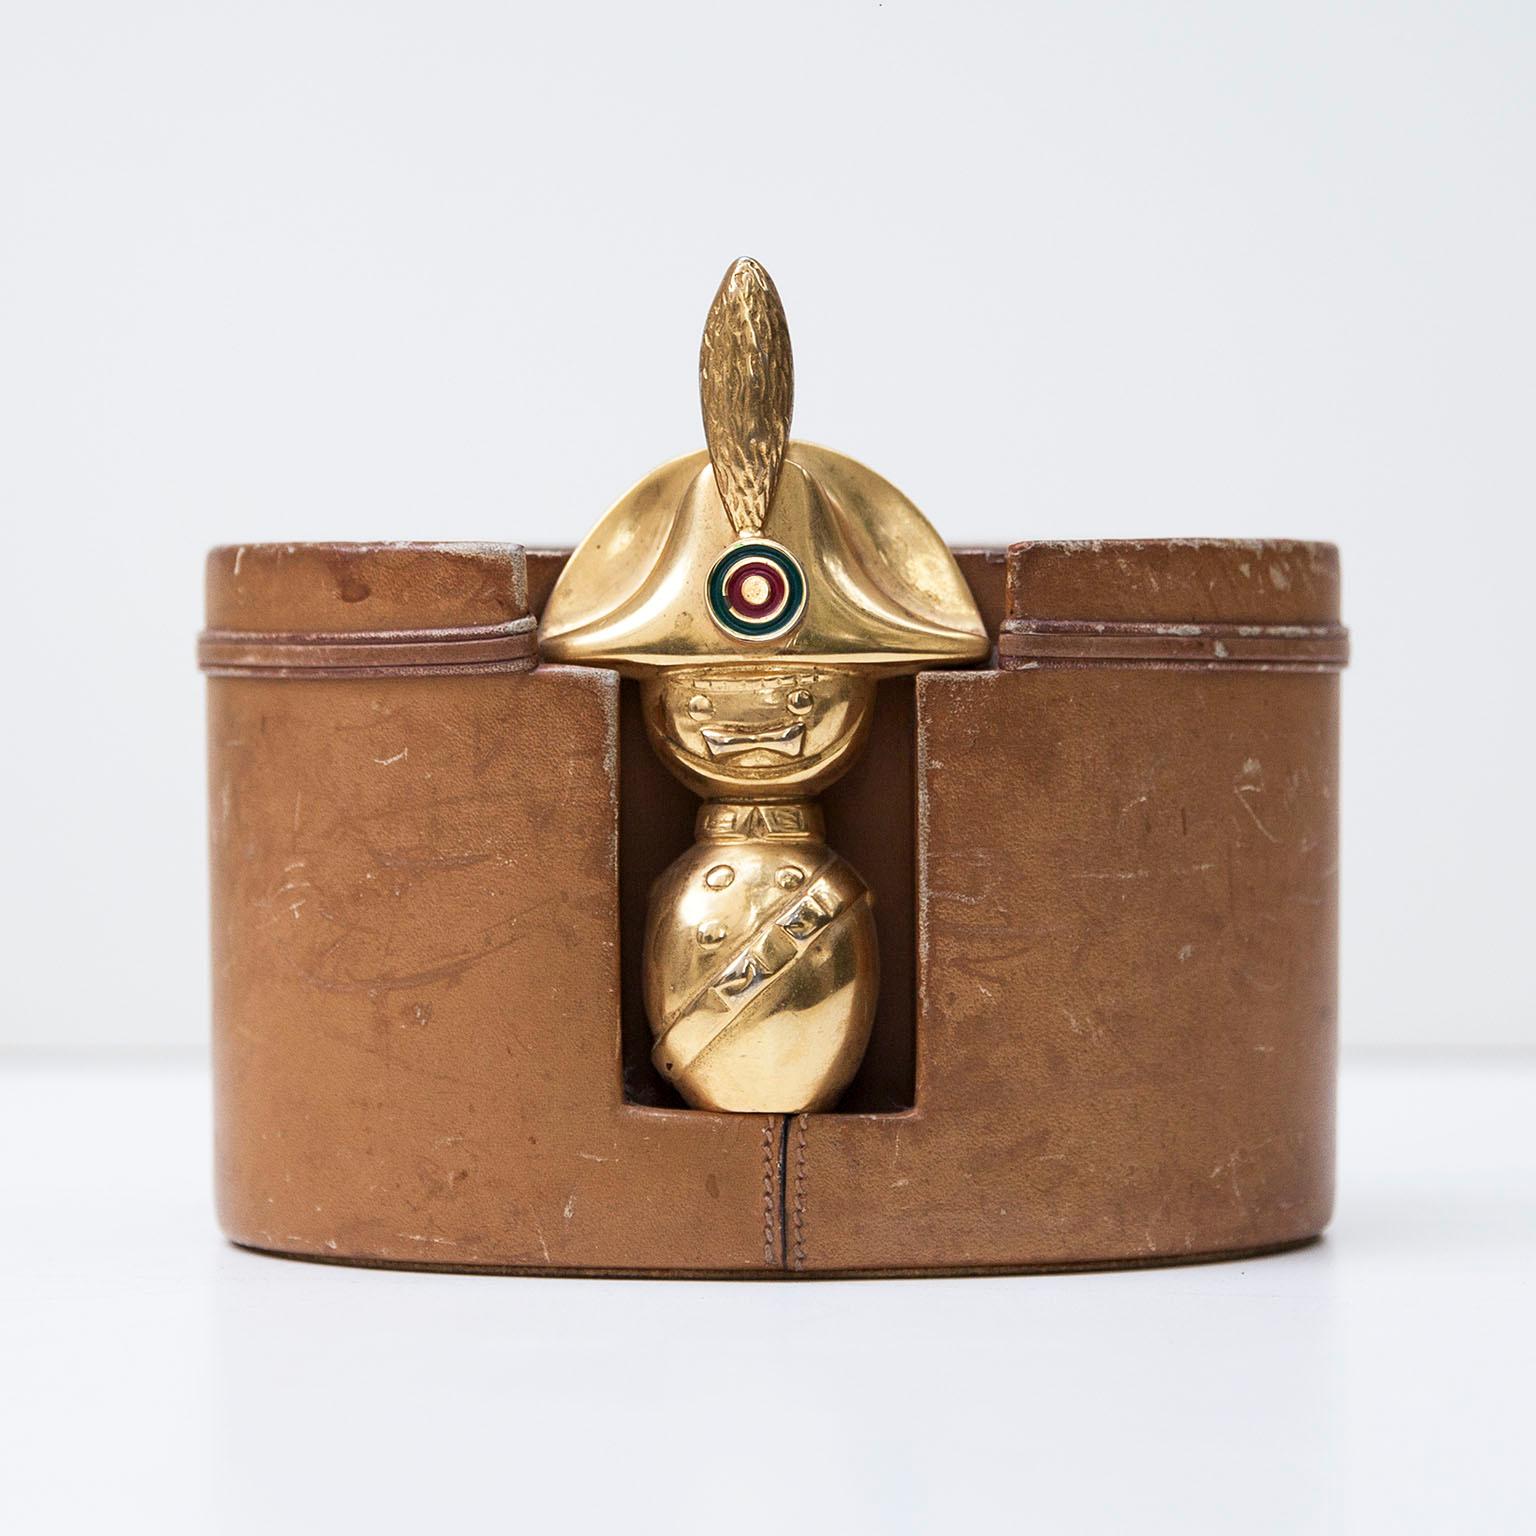 Elegant vintage cognac leather desk box by Gucci, decorated with an elegant brass Carabinieri in front.

Signed underside with Gucci.